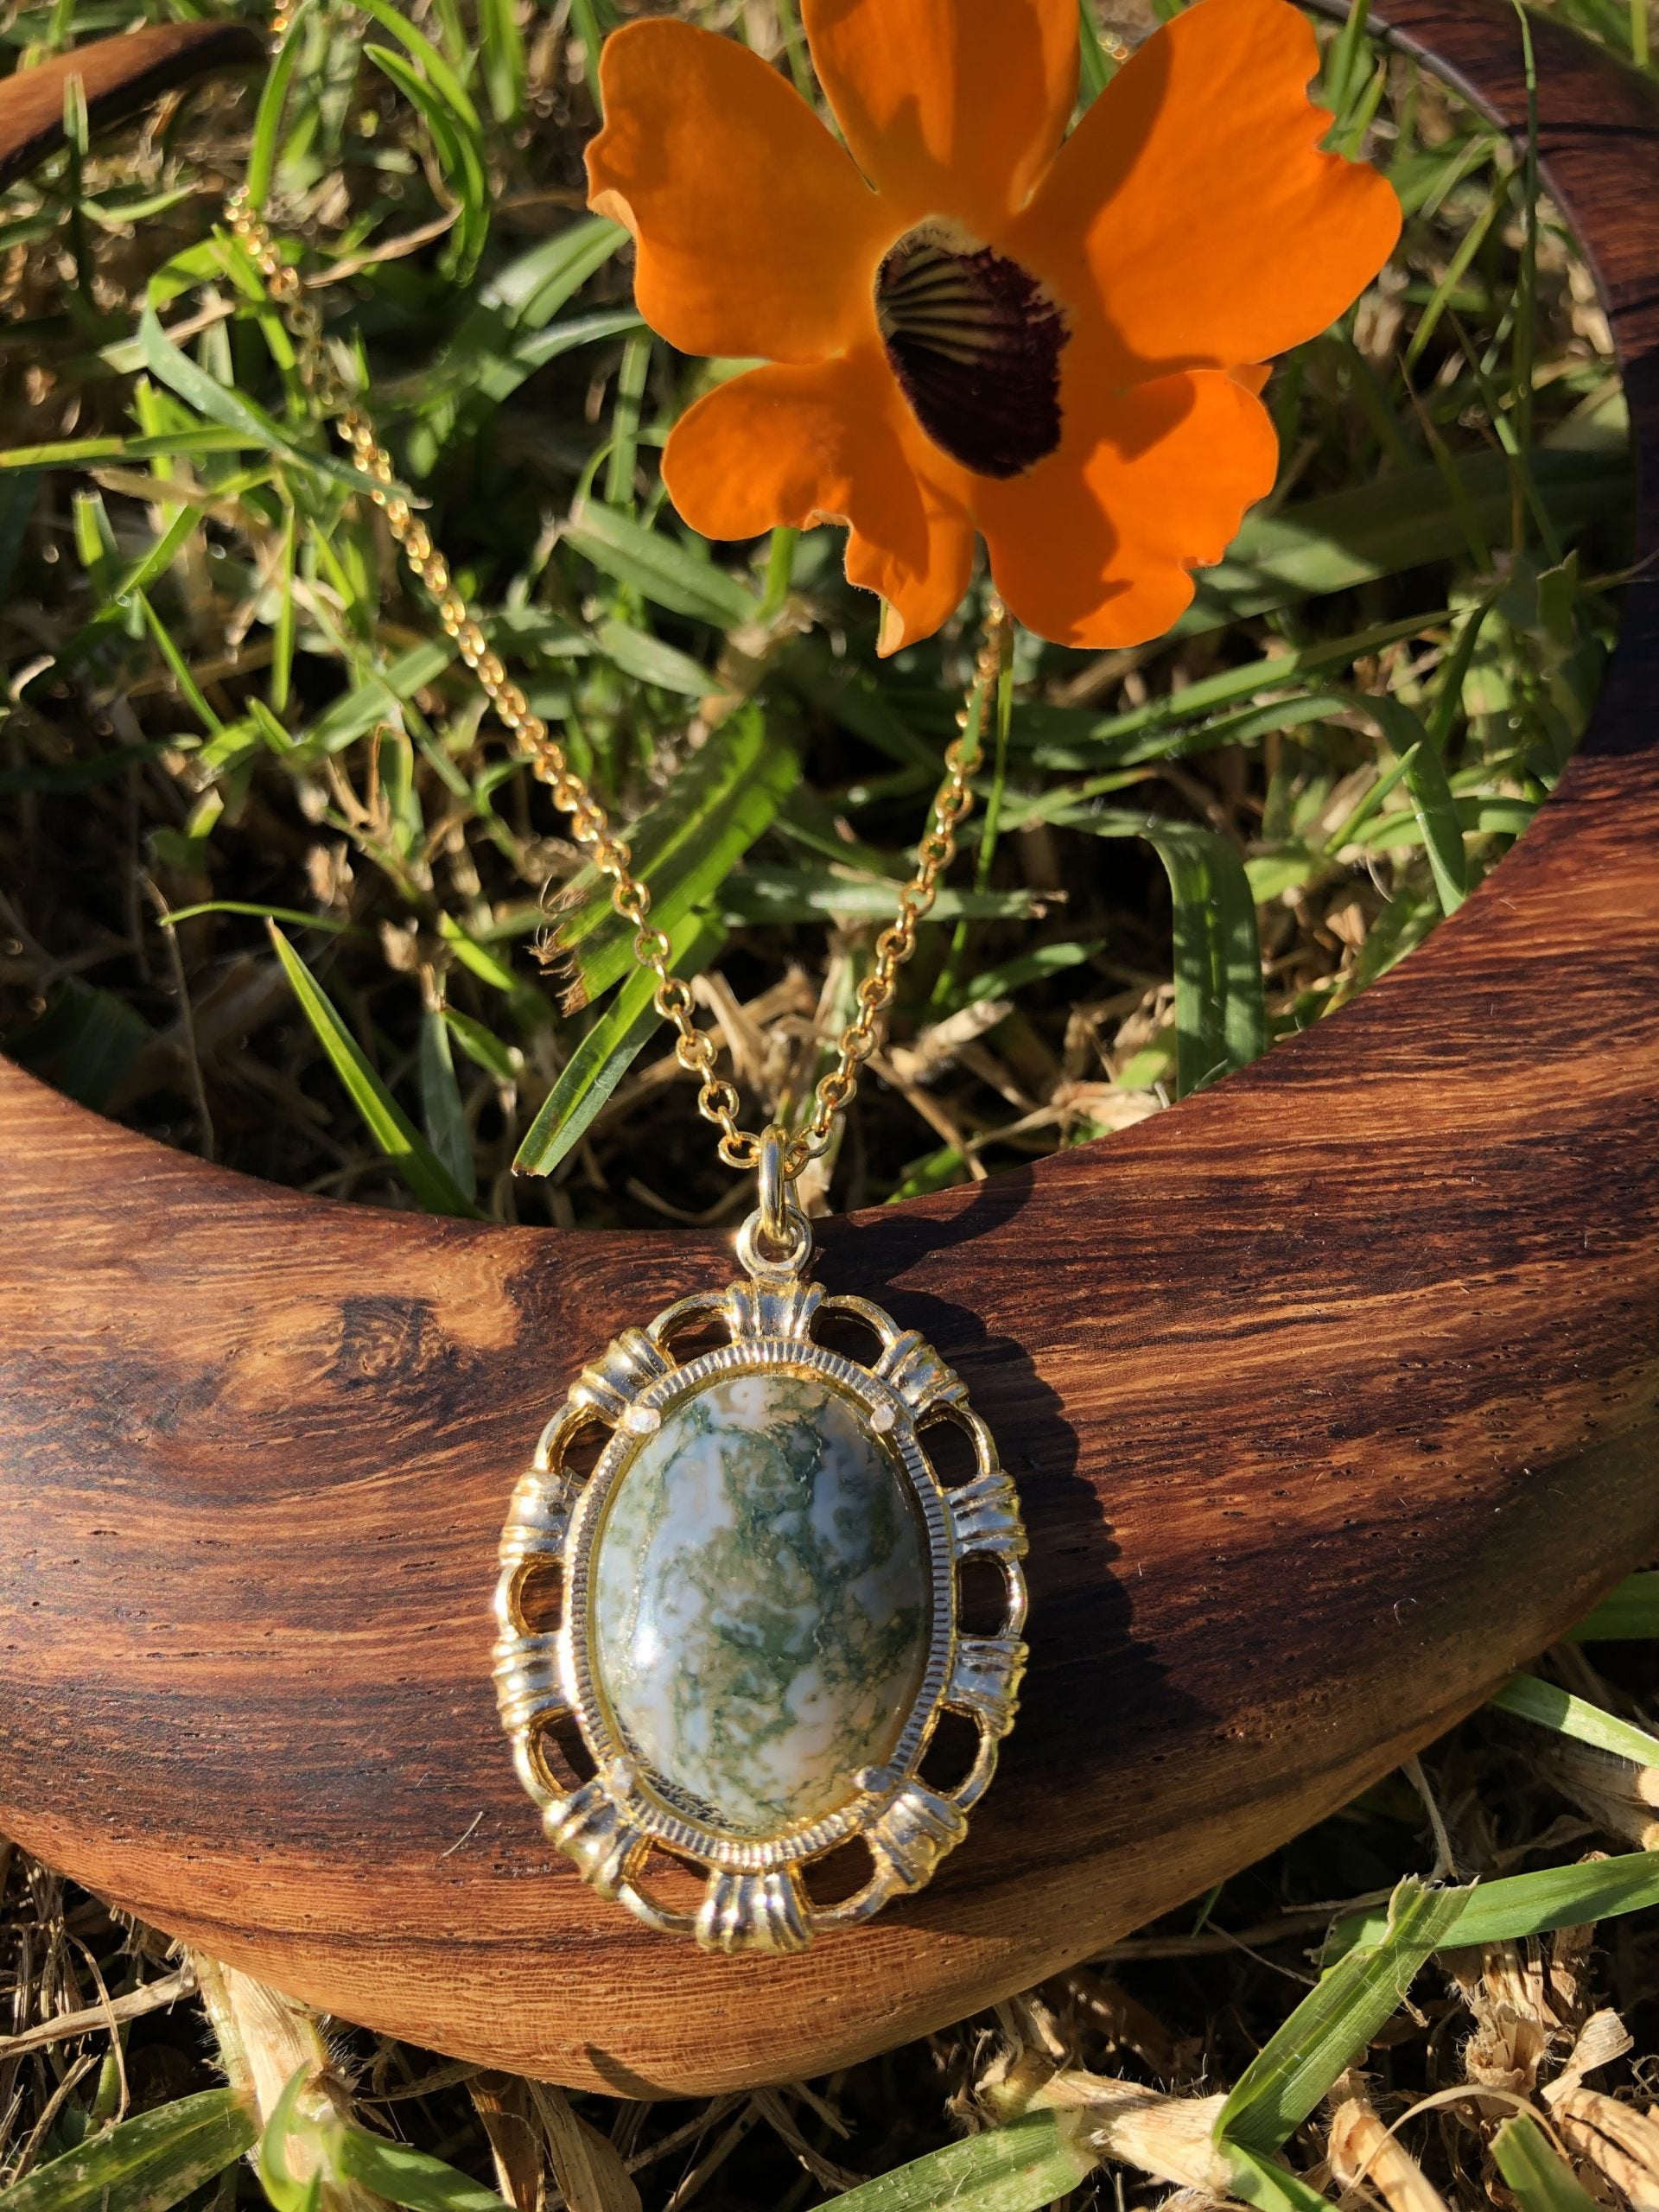 Necklace with natural Moss Agate from India, showing finely grained dark green "moss" in a transluscent milky white background, hand polished to a 20x15mm cabochon and set in gold plated setting with 19 inch chain.